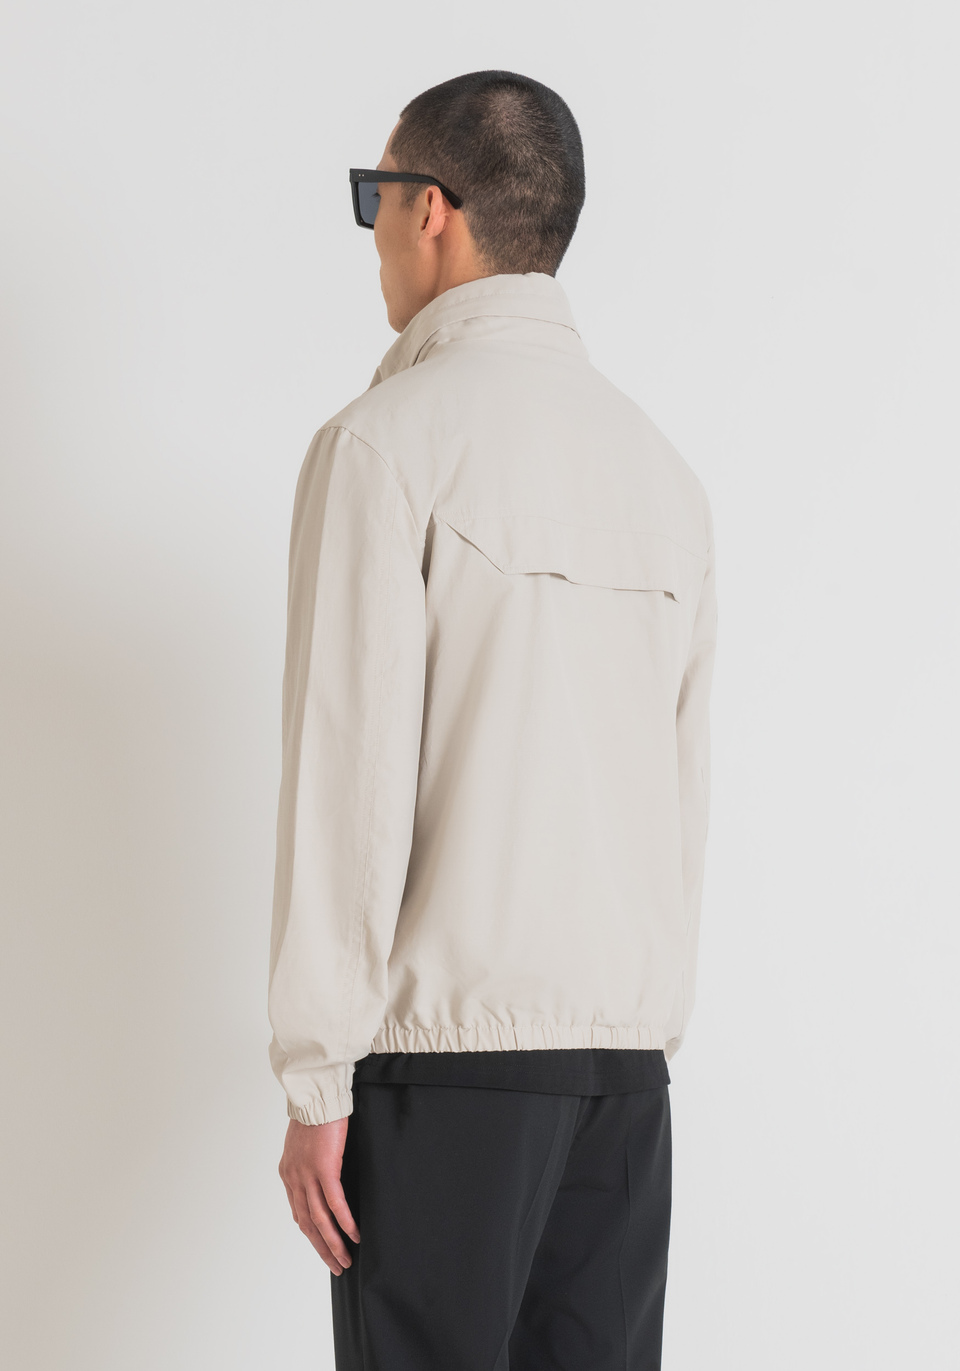 REGULAR FIT JACKET IN COTTON BLEND FABRIC AND LOGO PLAQUE - Antony Morato Online Shop